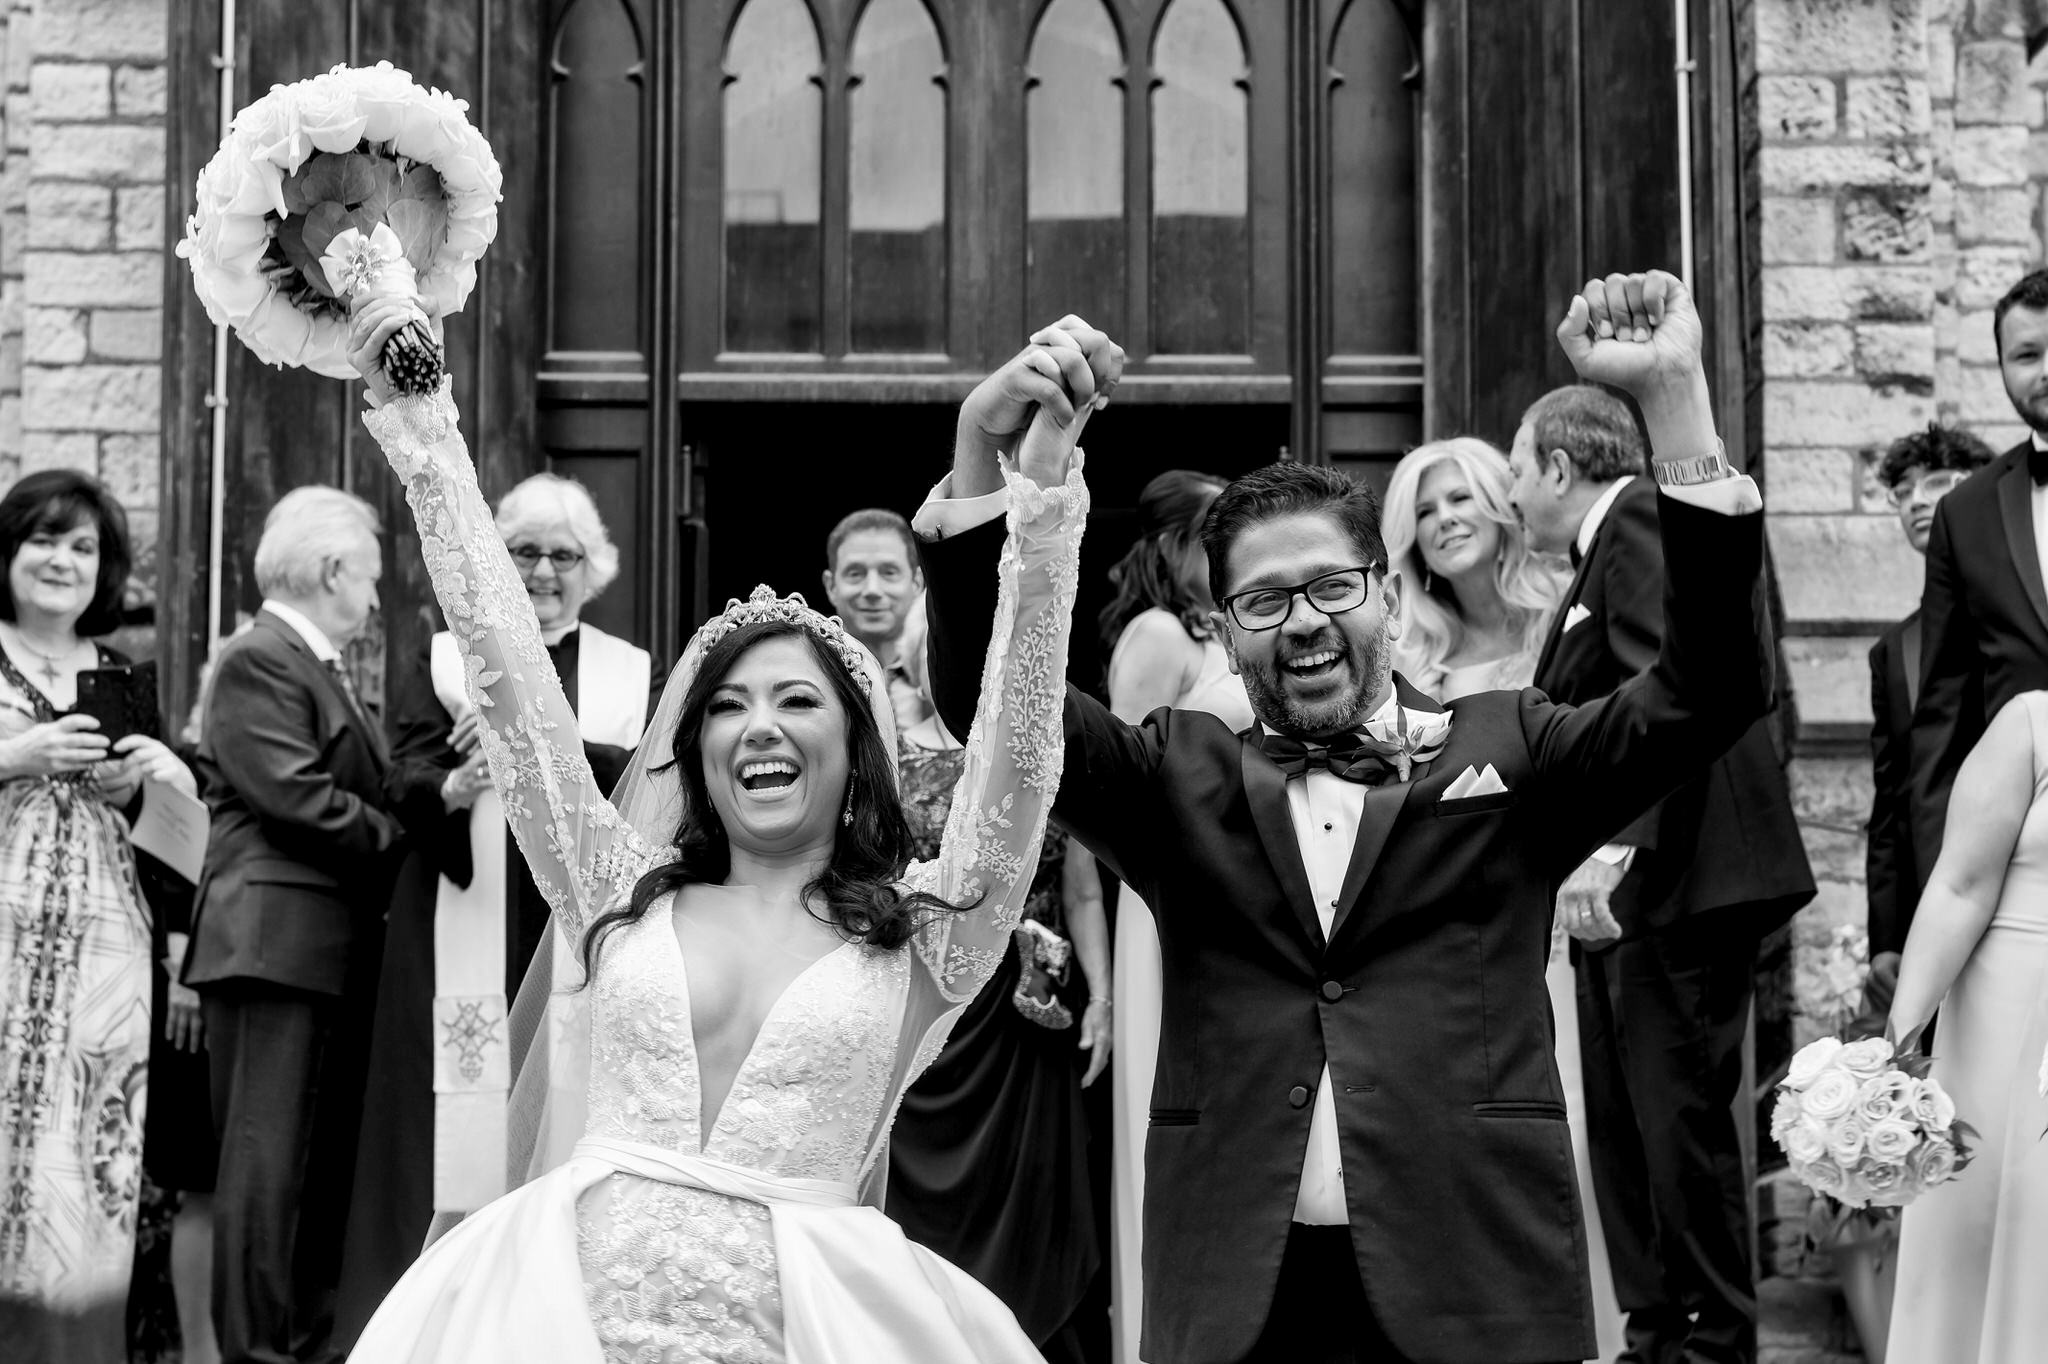 A bride and groom celebrate on the steps after marrying at Fort Street Presbyterian Church Detroit wedding